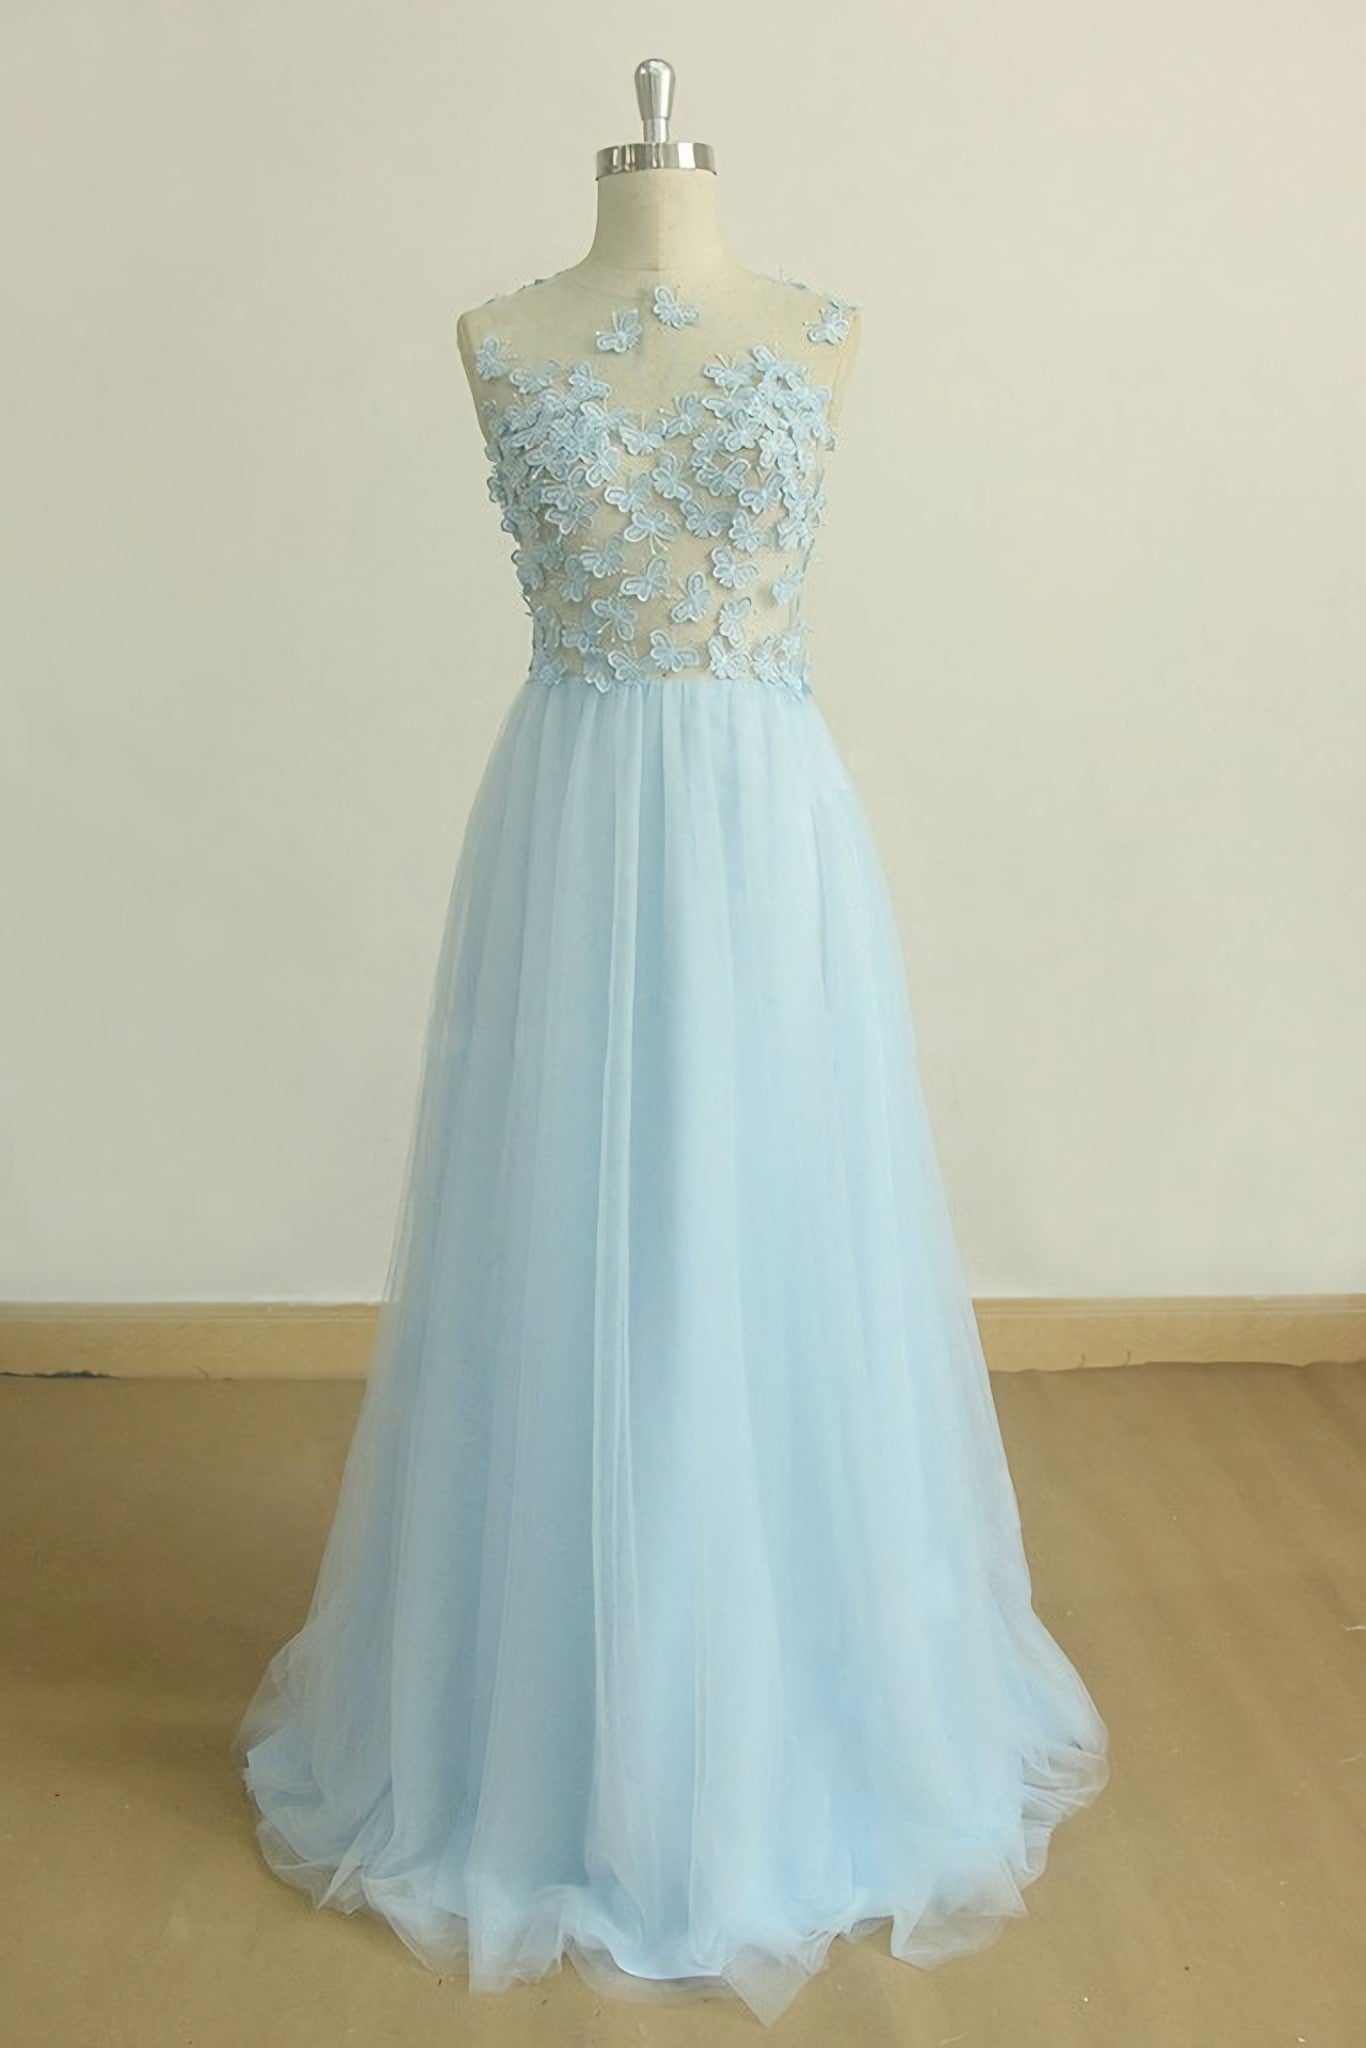 Homecoming Dress 2027, A Line Round Neck Baby Blue Lace Long Prom Dress, With Butterfly